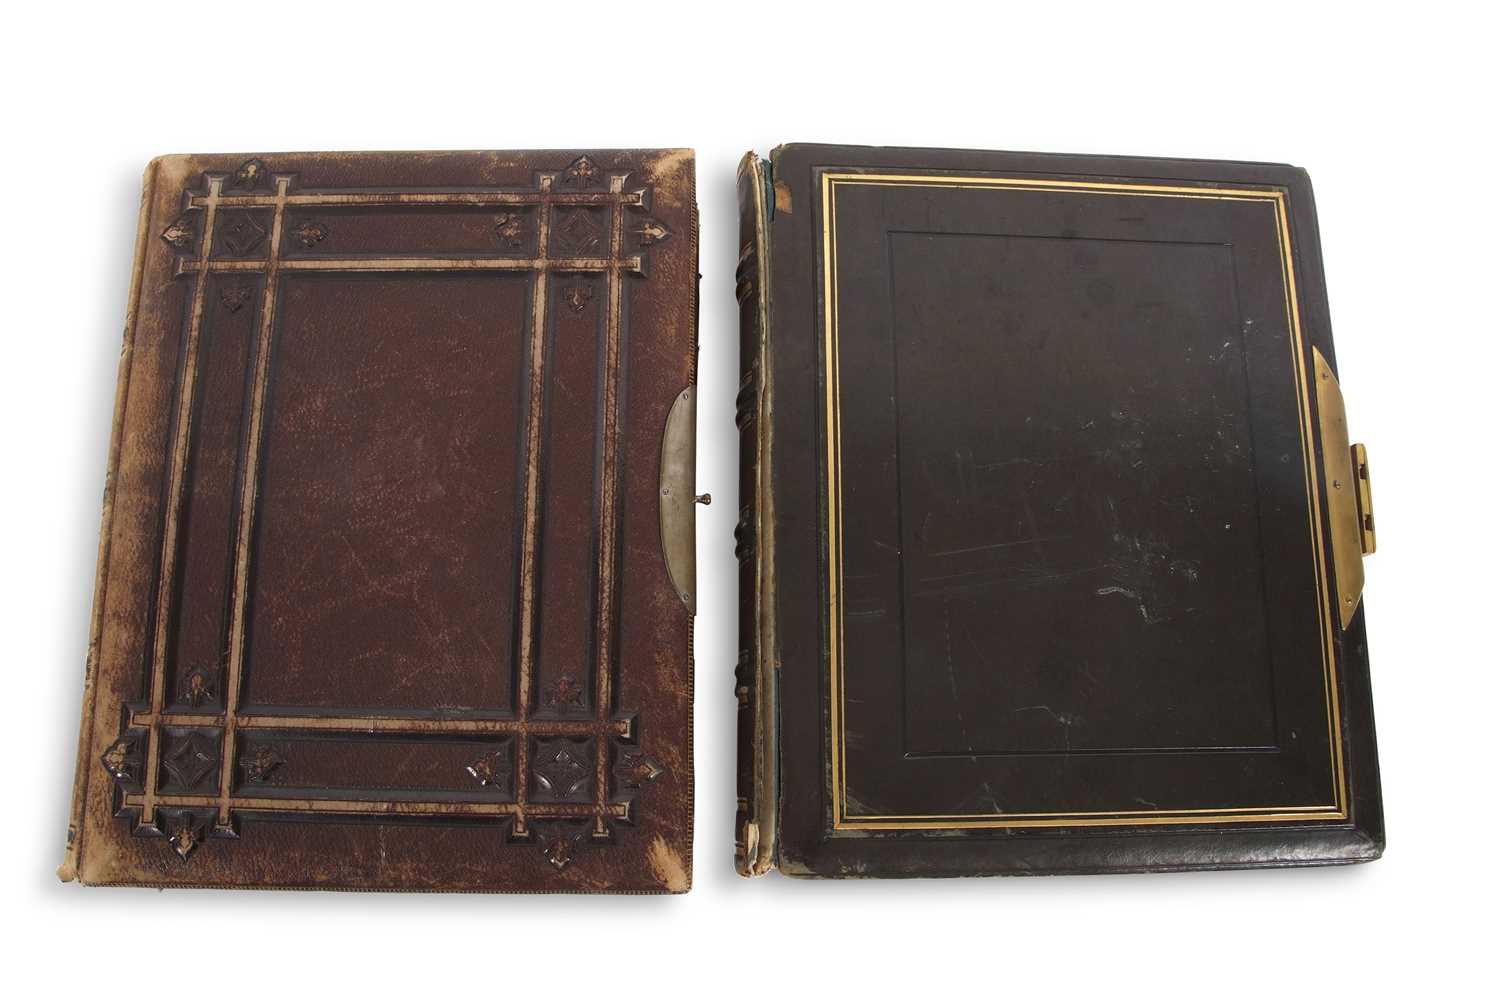 Group of two Victorian photograph albums, one in green morocco with gilt borders and a metal